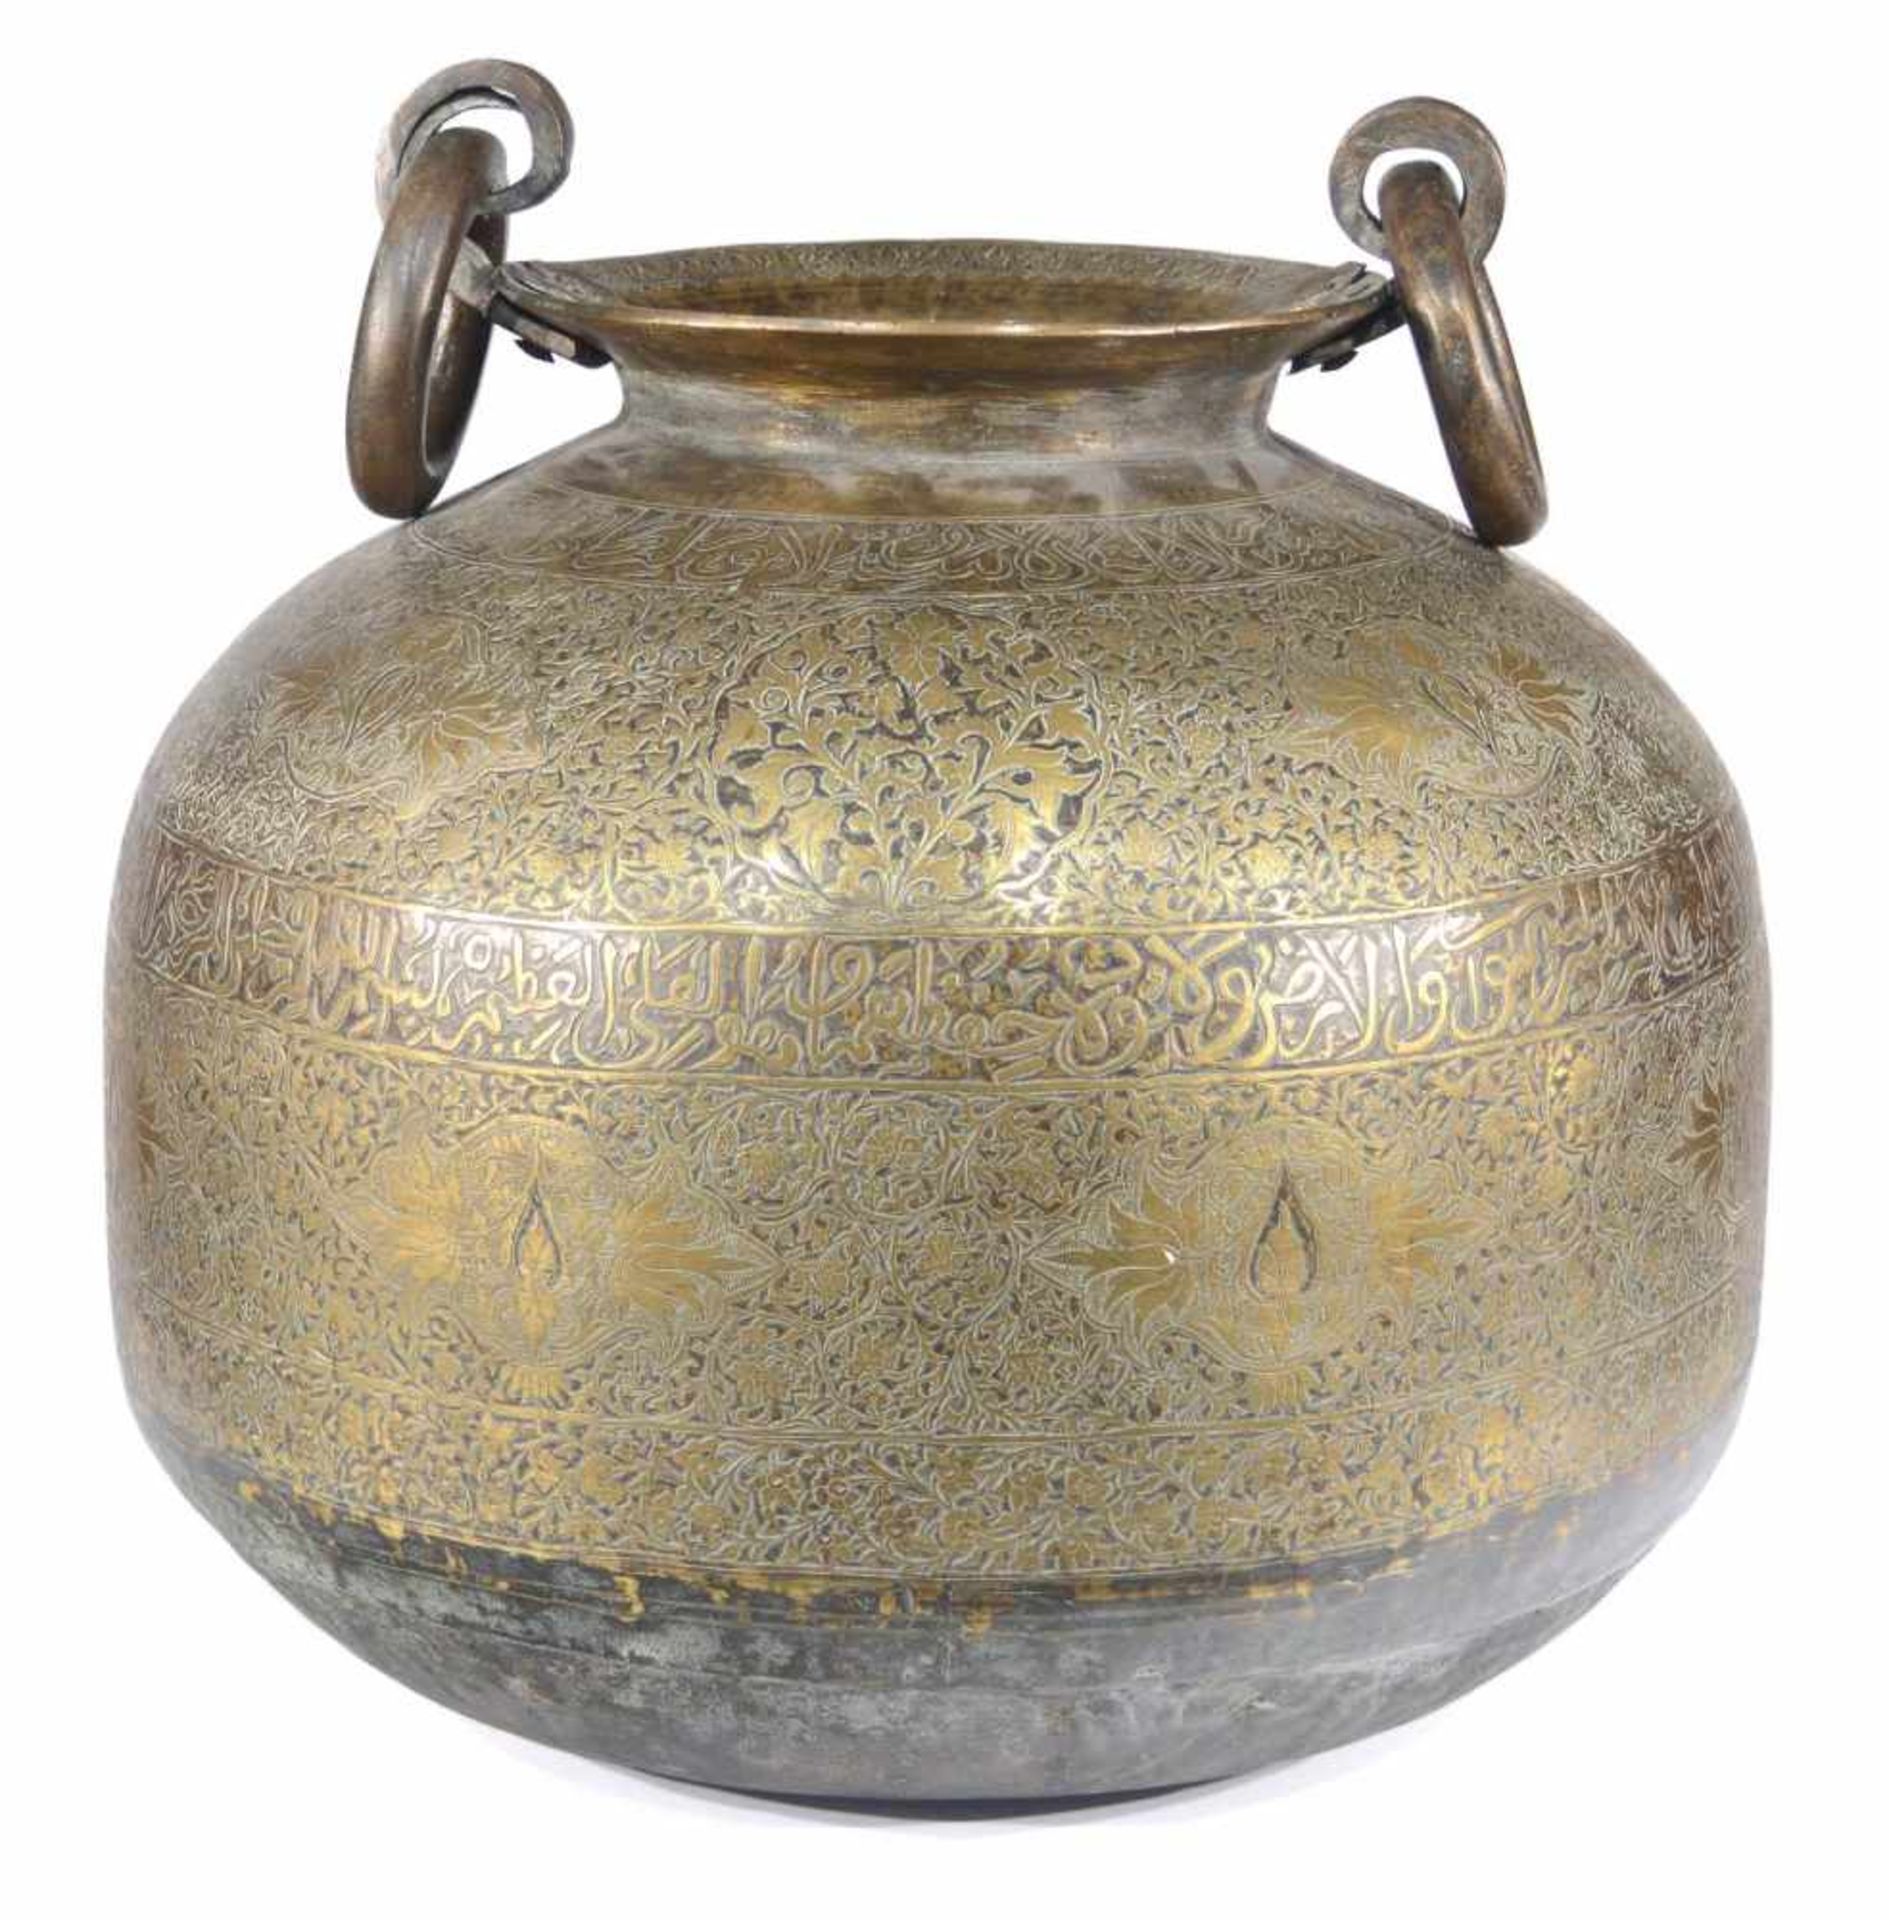 Extremely Fine Indian Islamic Brass Quran Lota